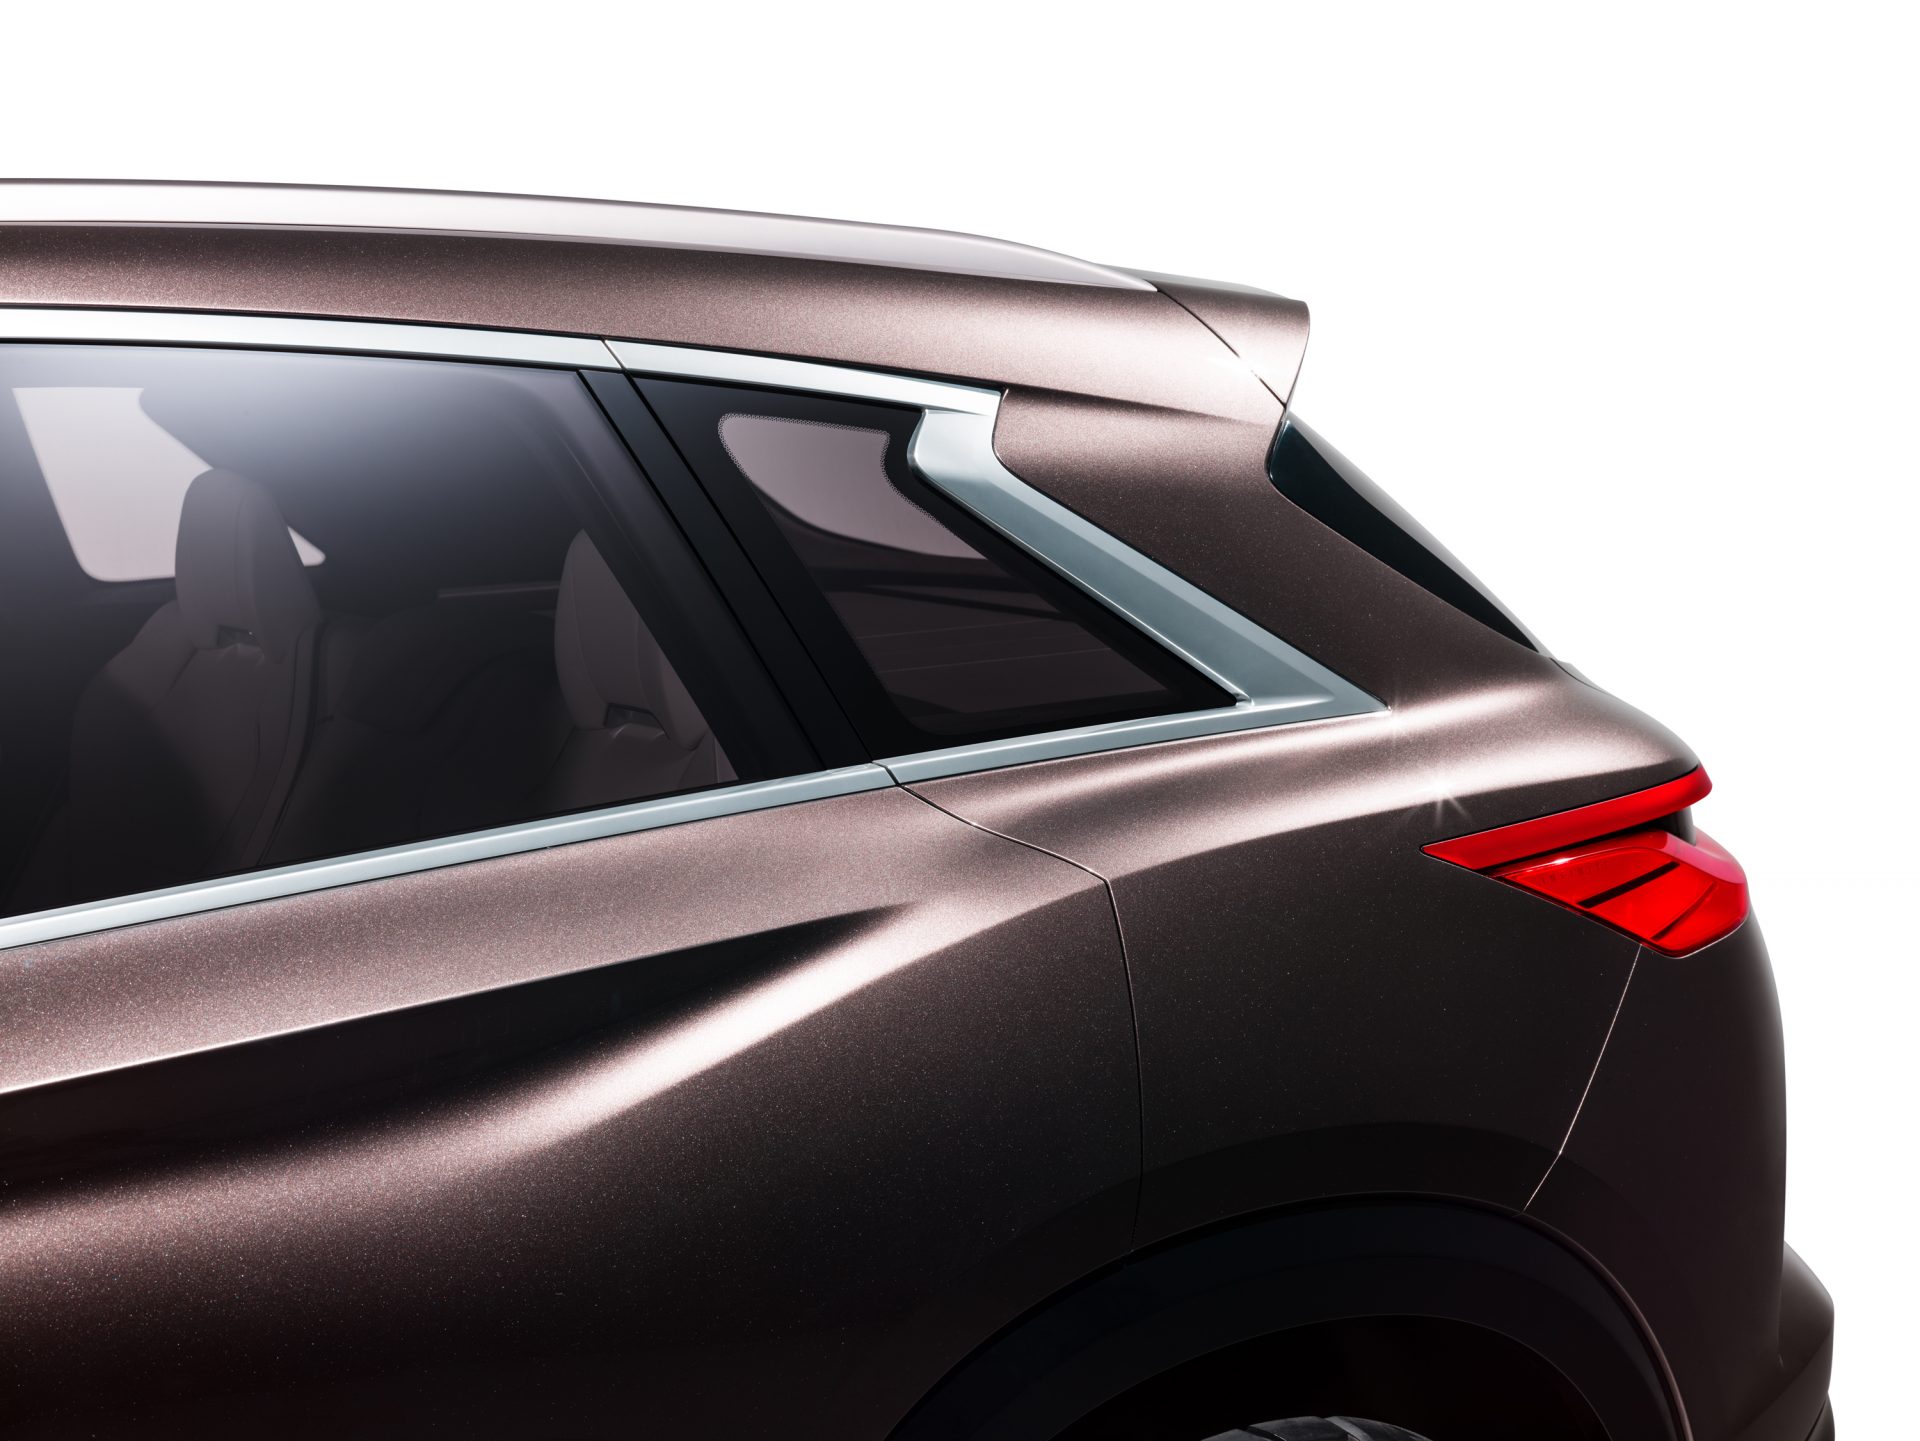 Demonstrating how the design of the 2016 QX Sport Inspiration, its conceptual forebear, could be adapted for a future production model, the QX50 Concept confidently articulates INFINITI’s ‘Powerful Elegance’ design language. A ‘cabin-forward’ silhouette combines with muscular lines and flowing surfaces to telegraph its purpose as a dynamic and practical crossover.